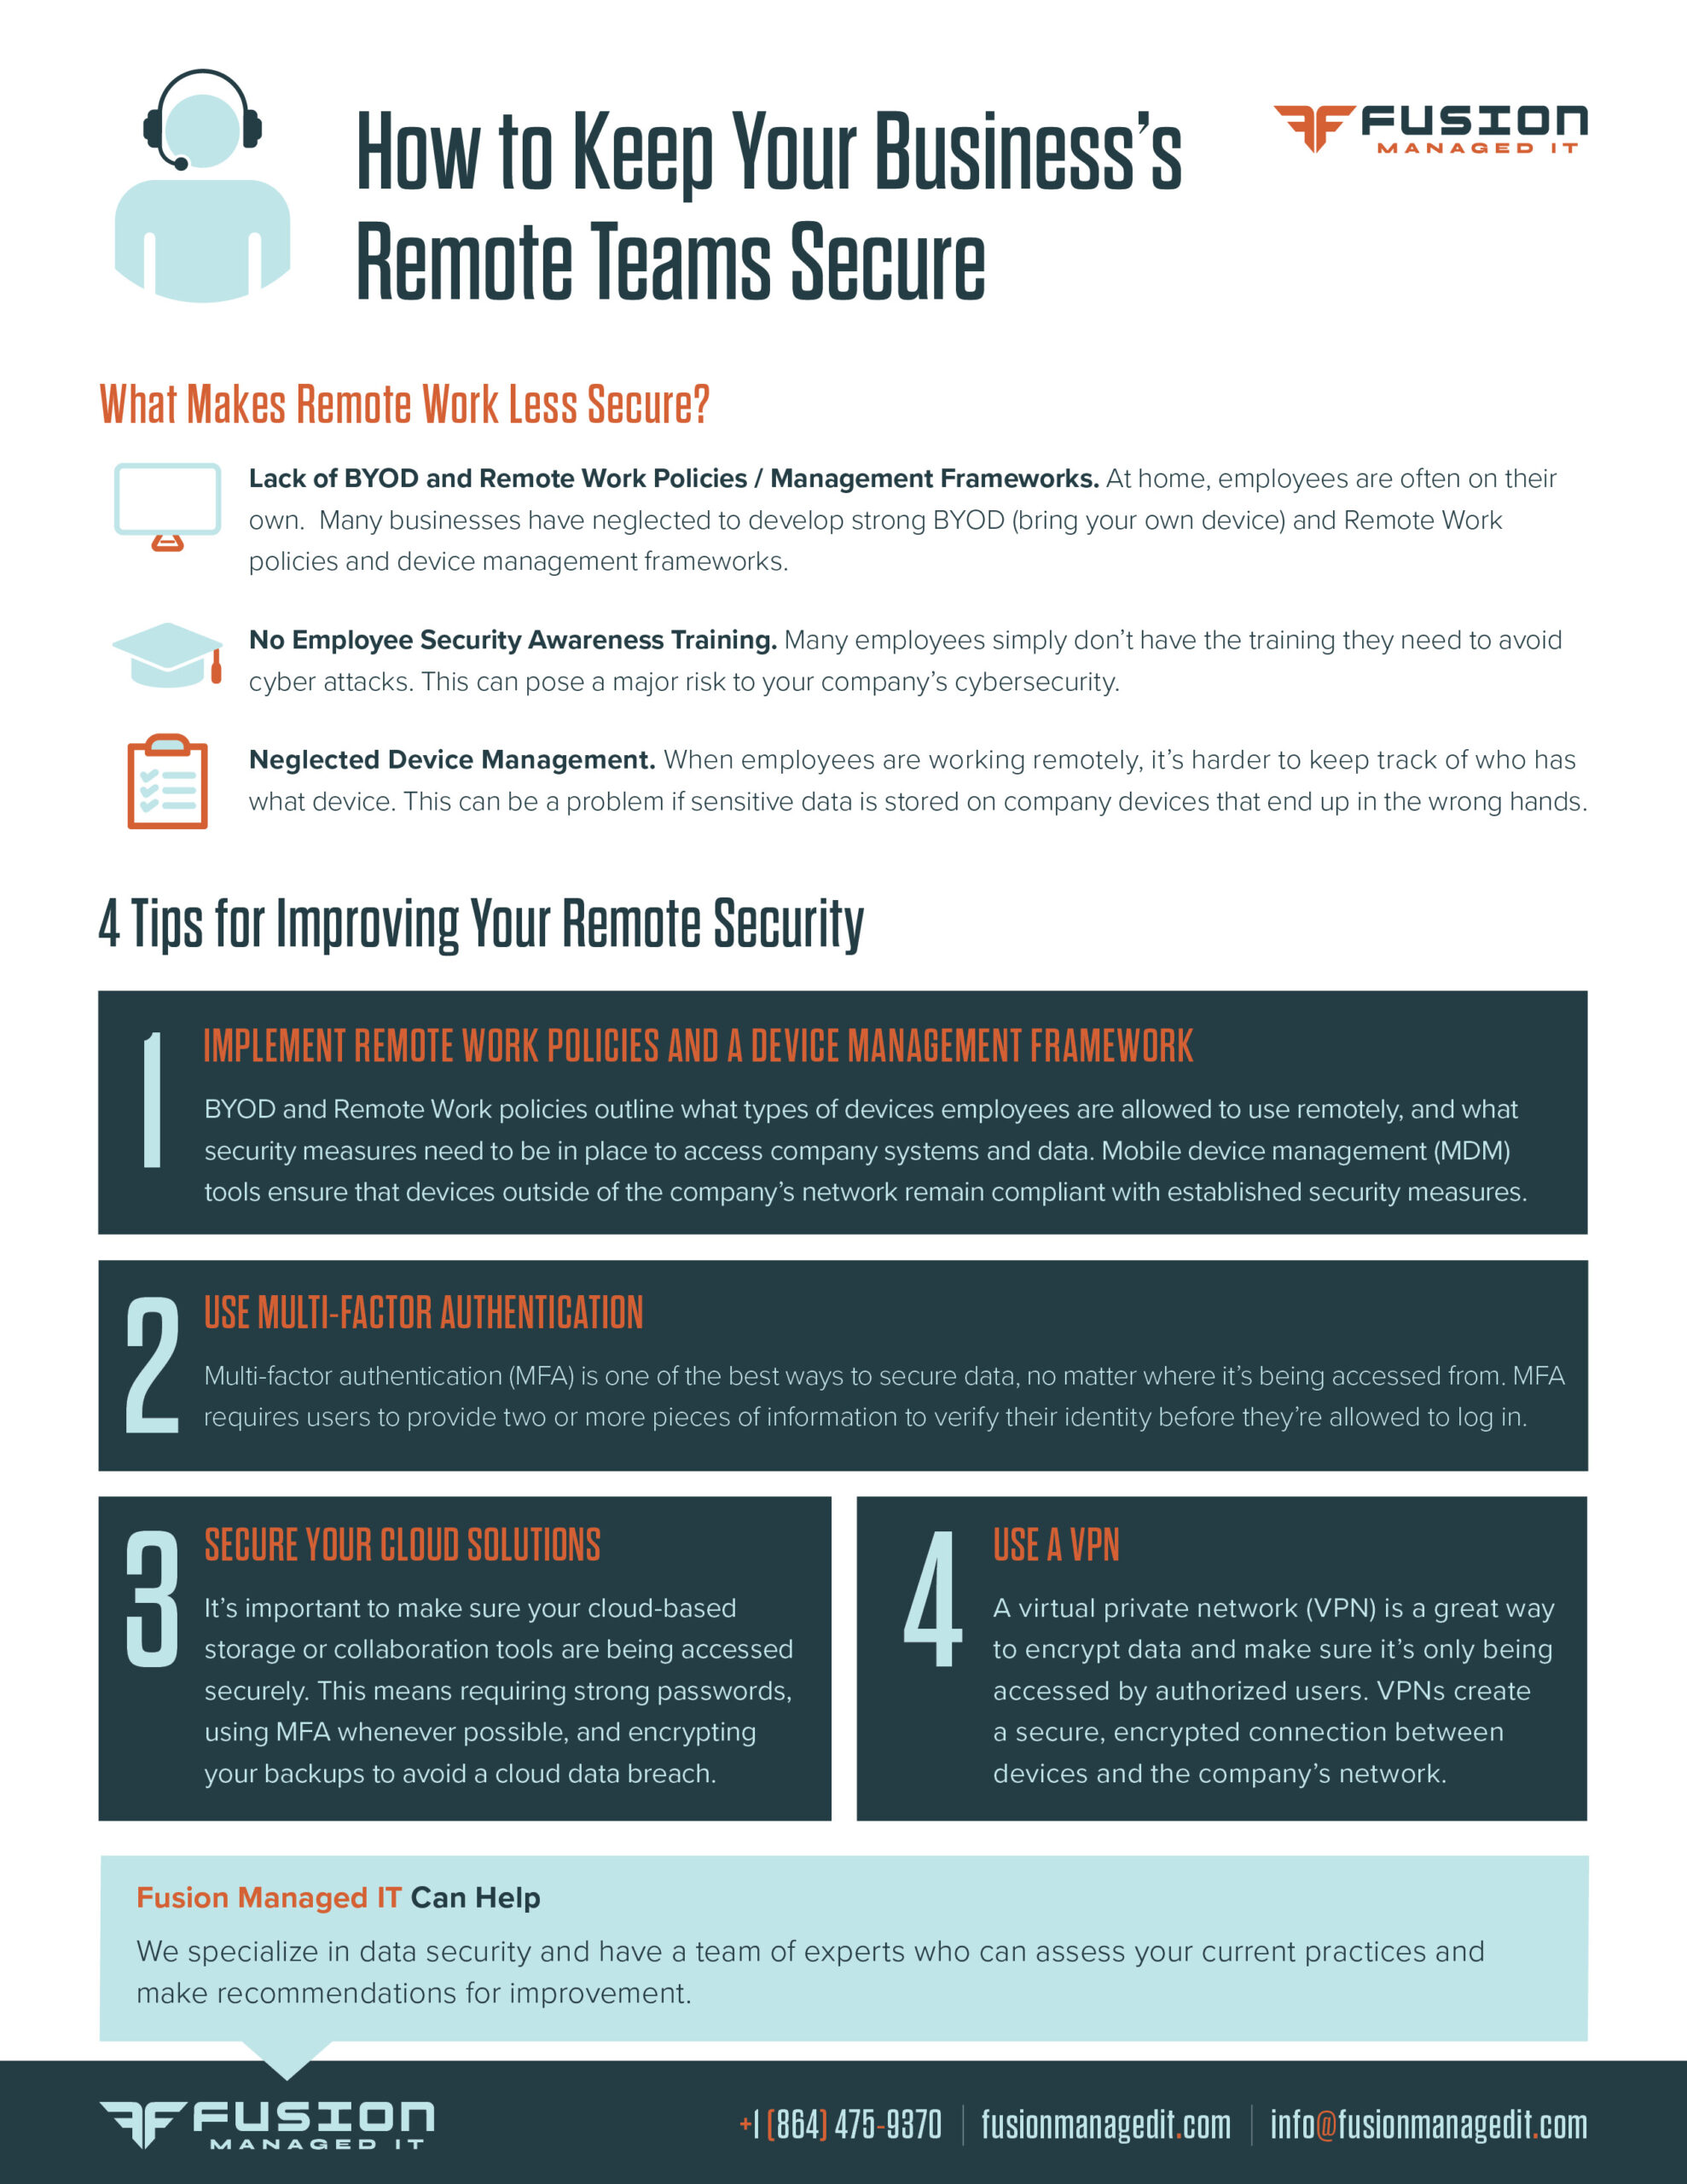 How to Keep Your Business's Remote Teams Secure infographic